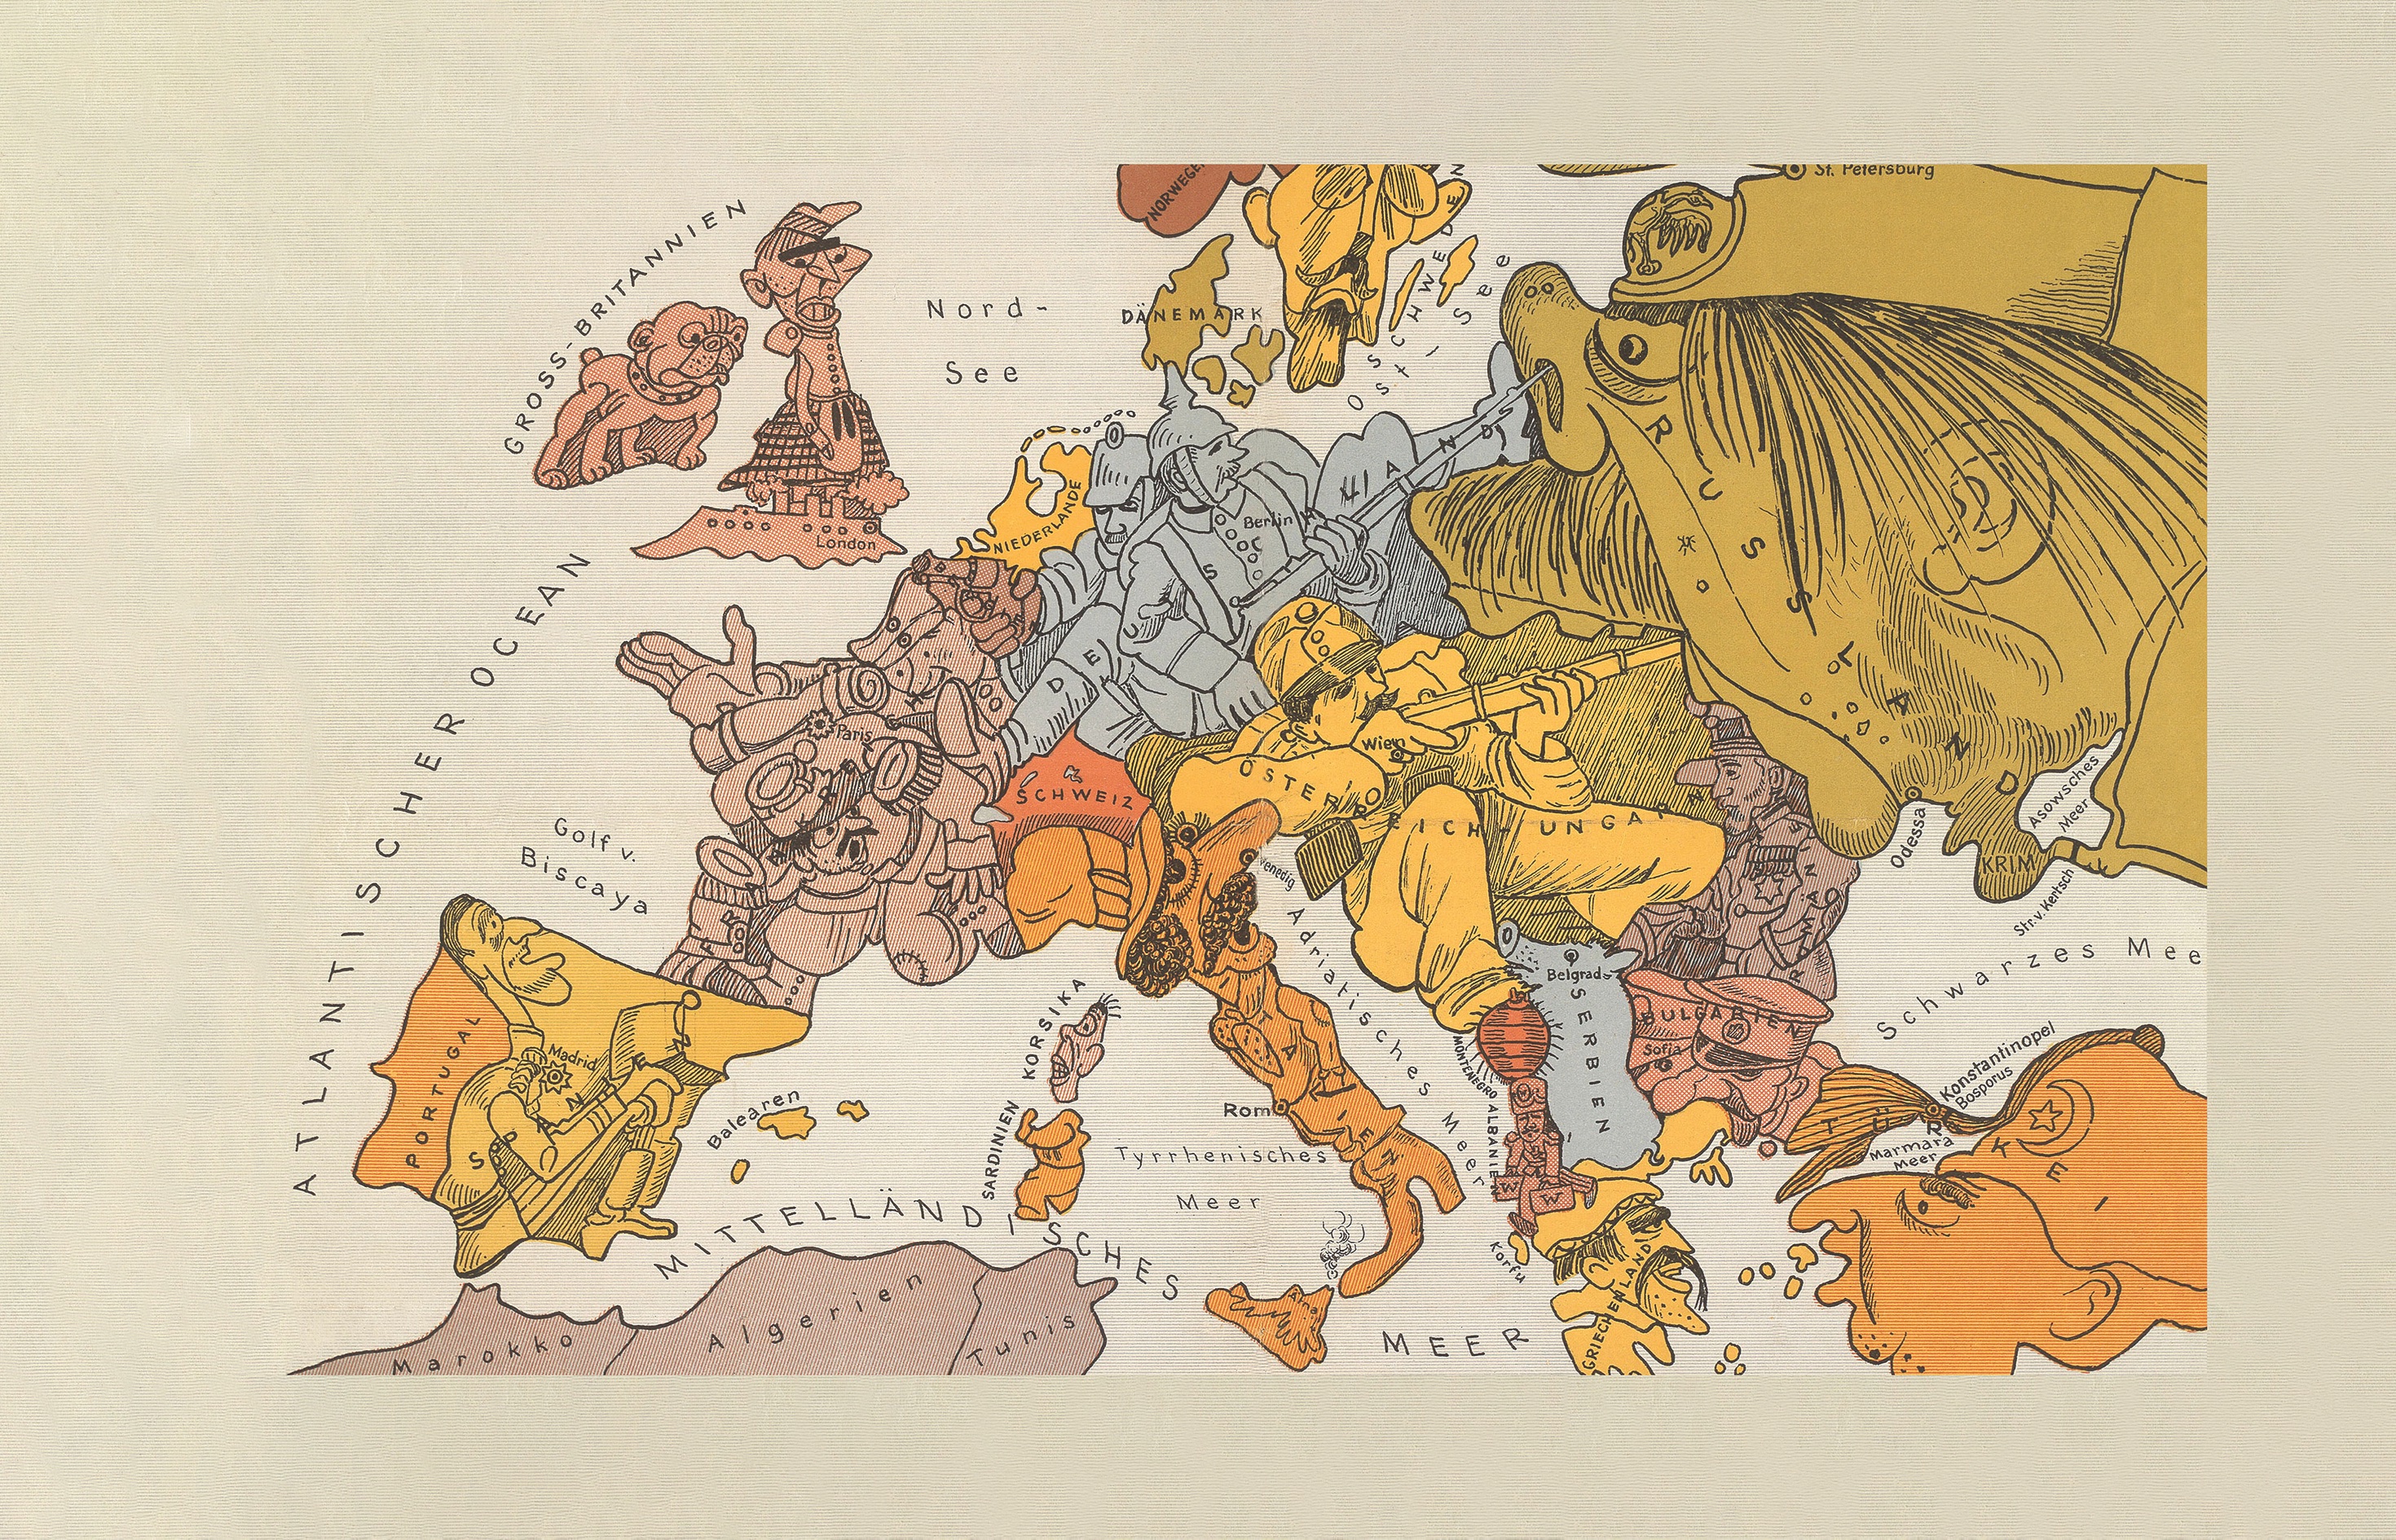 Poland is nowhere to be seen on this satirical map of Europe, published in Germany in 1914. (British Library)